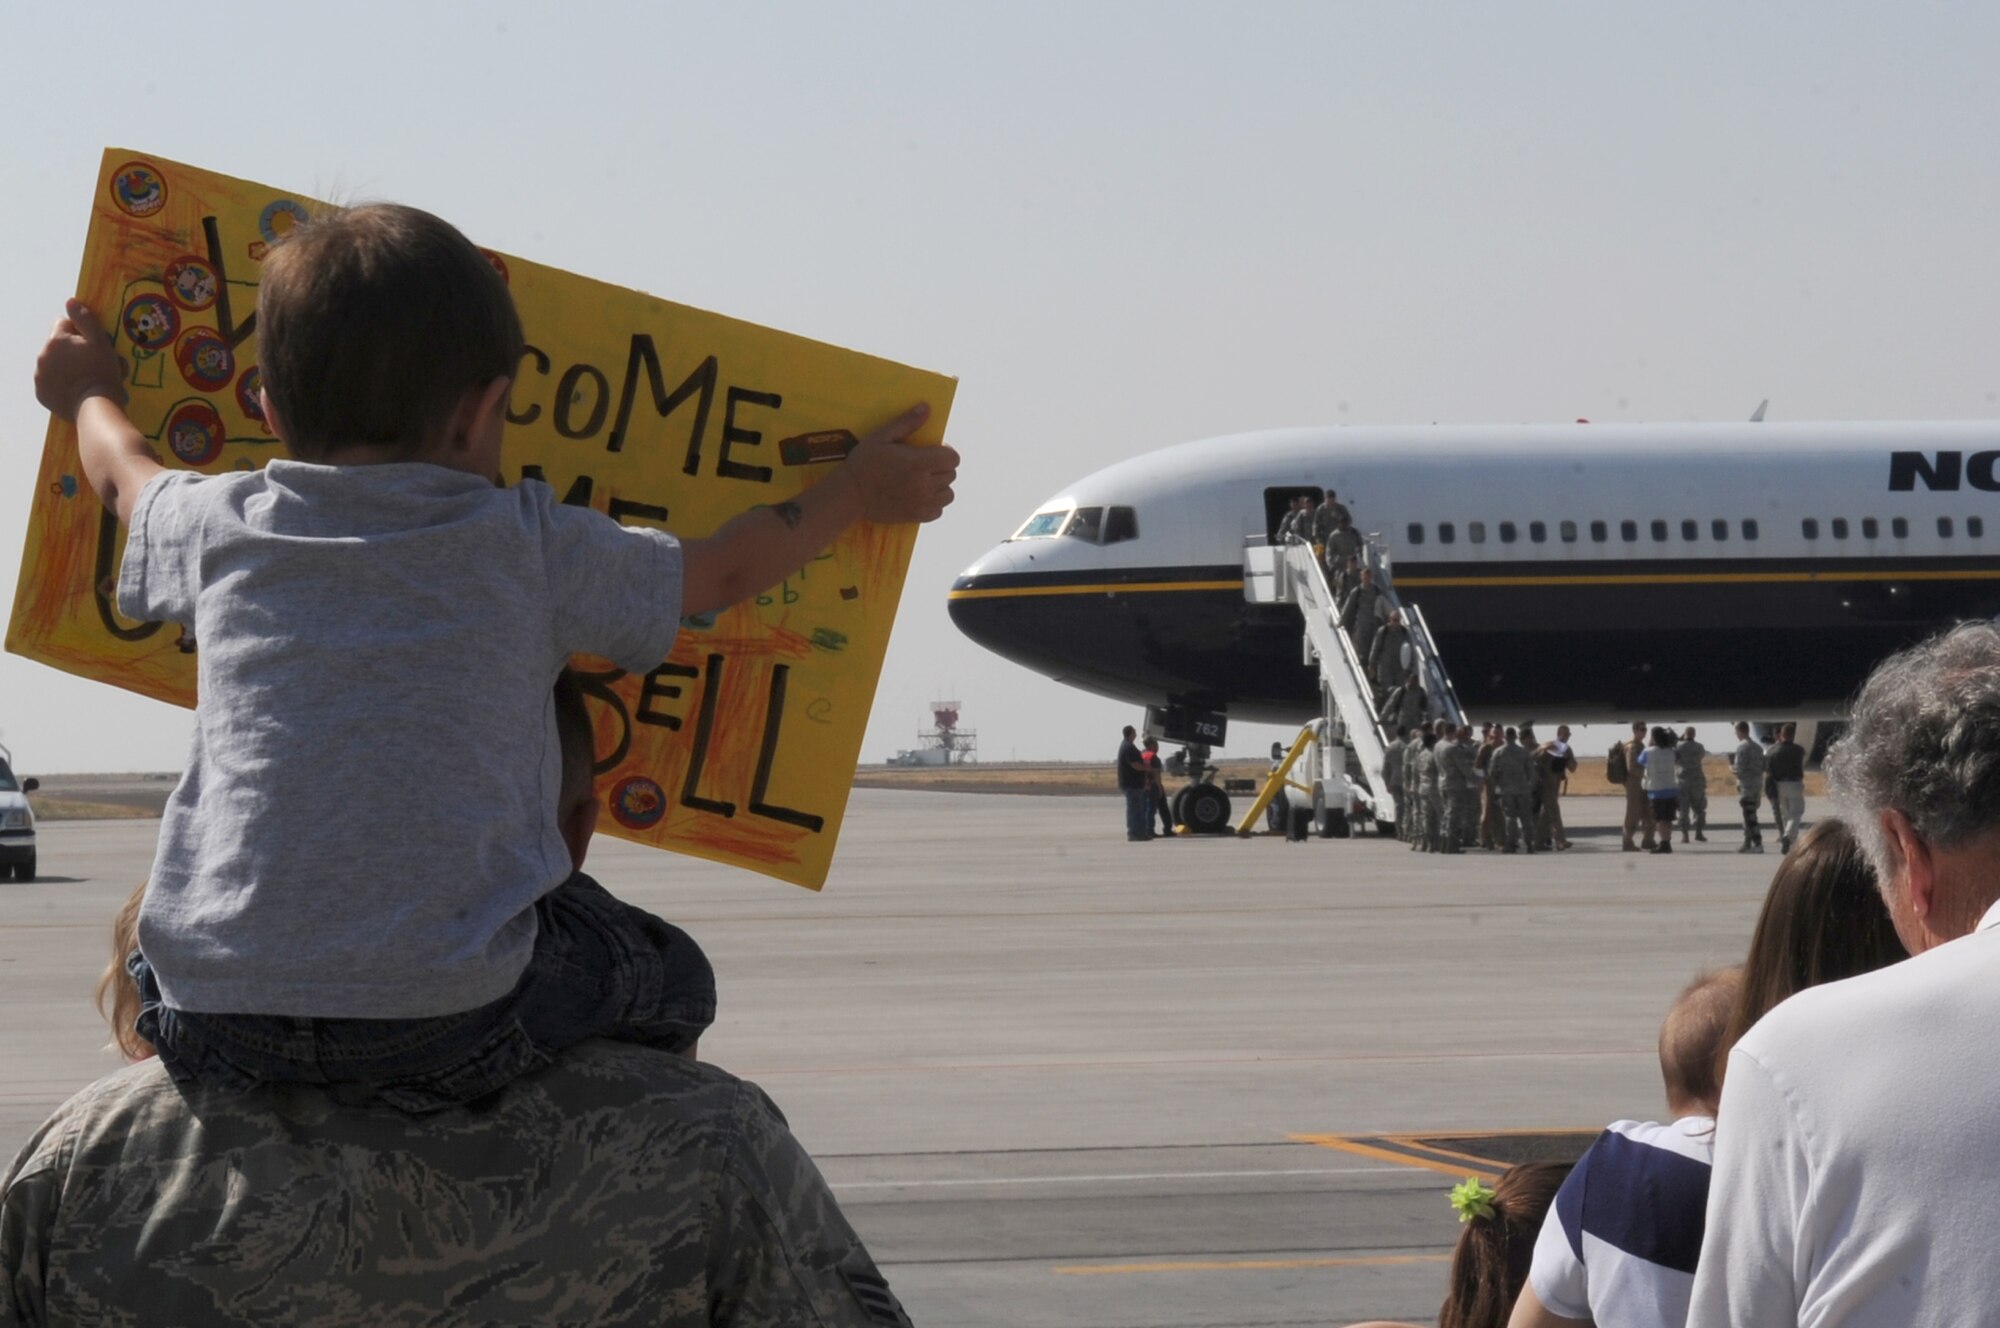 Families welcomed back Airmen from the 366th Fighter Wing who deployed to Southwest Asia in support of Operation Enduring Freedom at Mountain Home Air Force Base, Idaho. The deployed members executed Combined Forces Air Component Command priorities, took advantage of training opportunities to impart valuable knowledge to host nation partners and bolstered regional security. (U.S. Air Force photo/Staff Sgt. Roy Lynch)